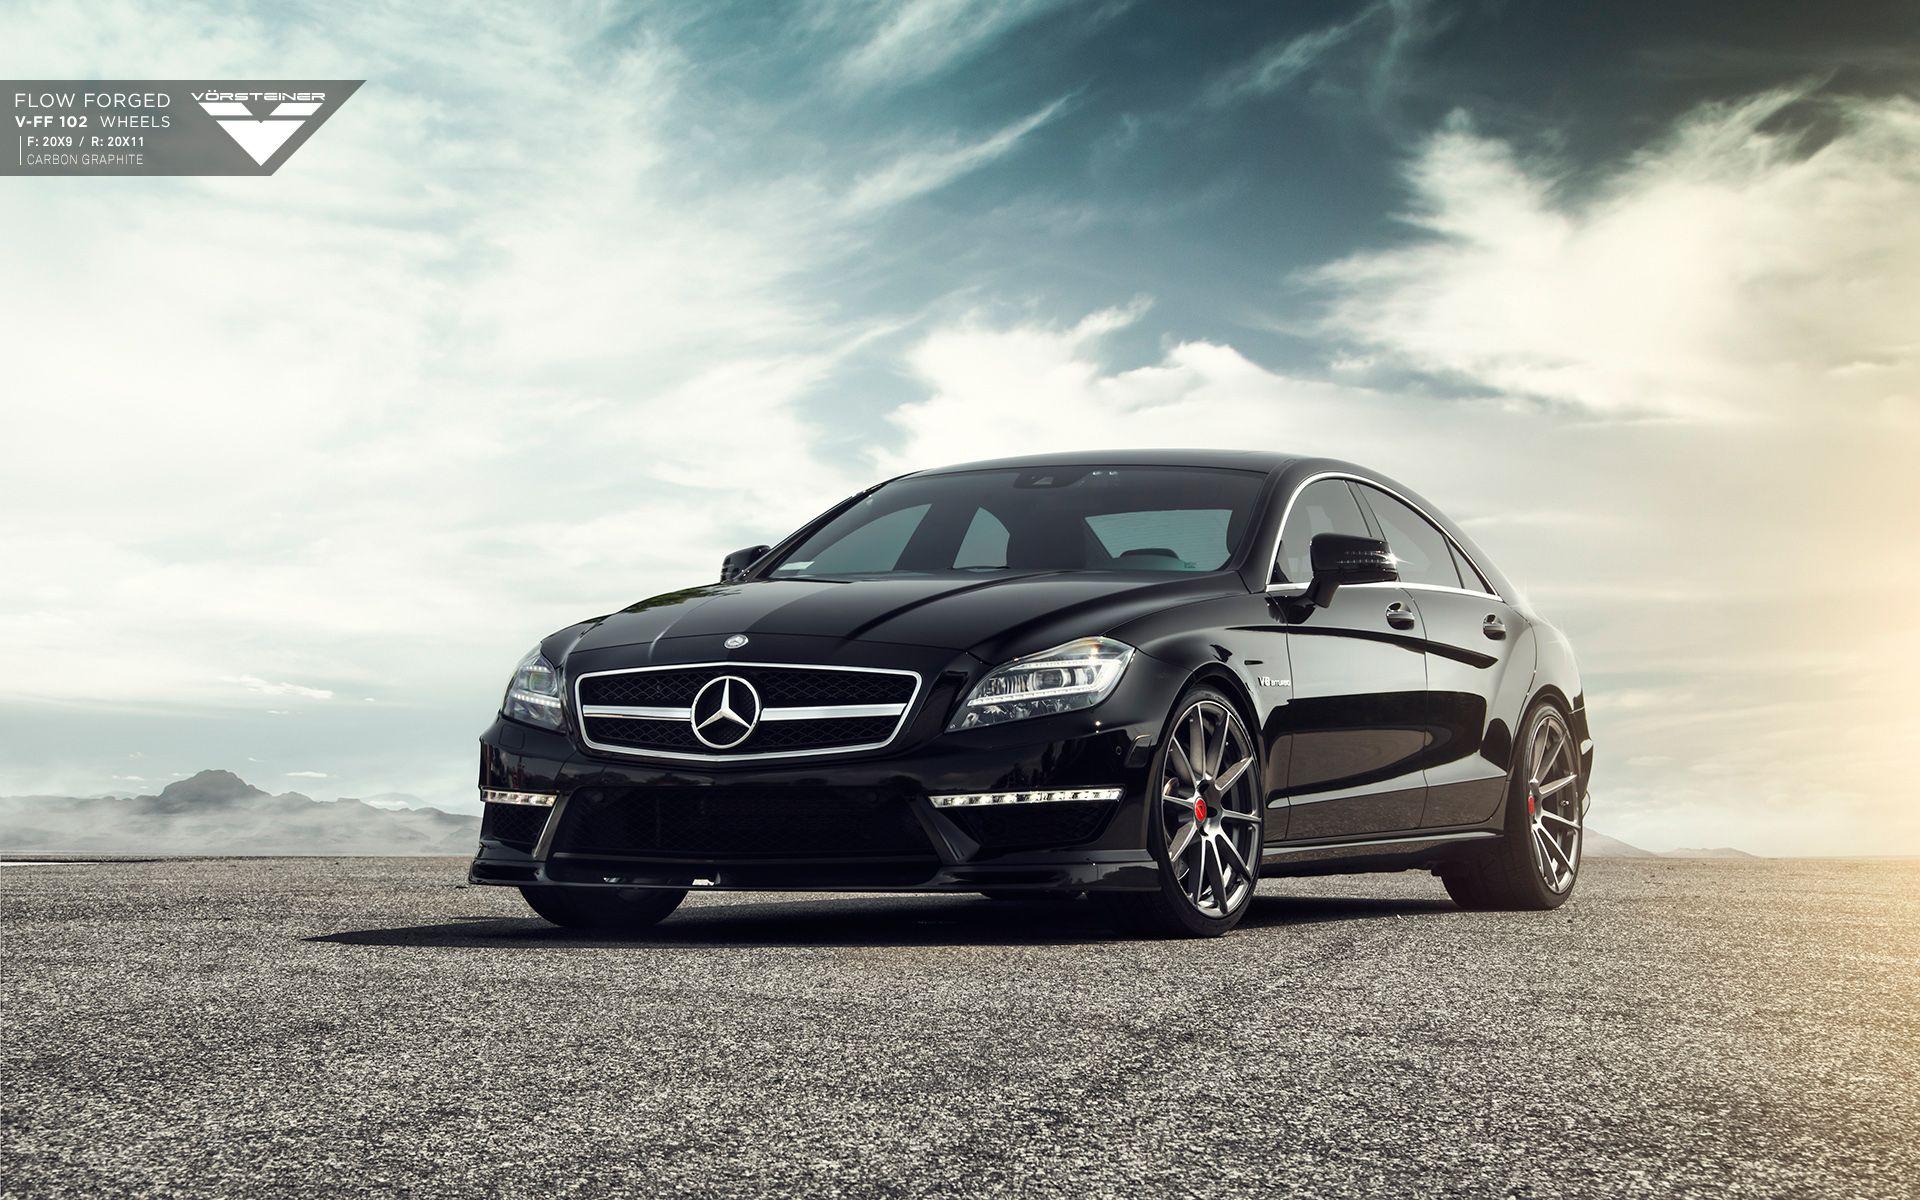 Mercedes Cls Wallpapers Top Free Mercedes Cls Backgrounds Wallpaperaccess